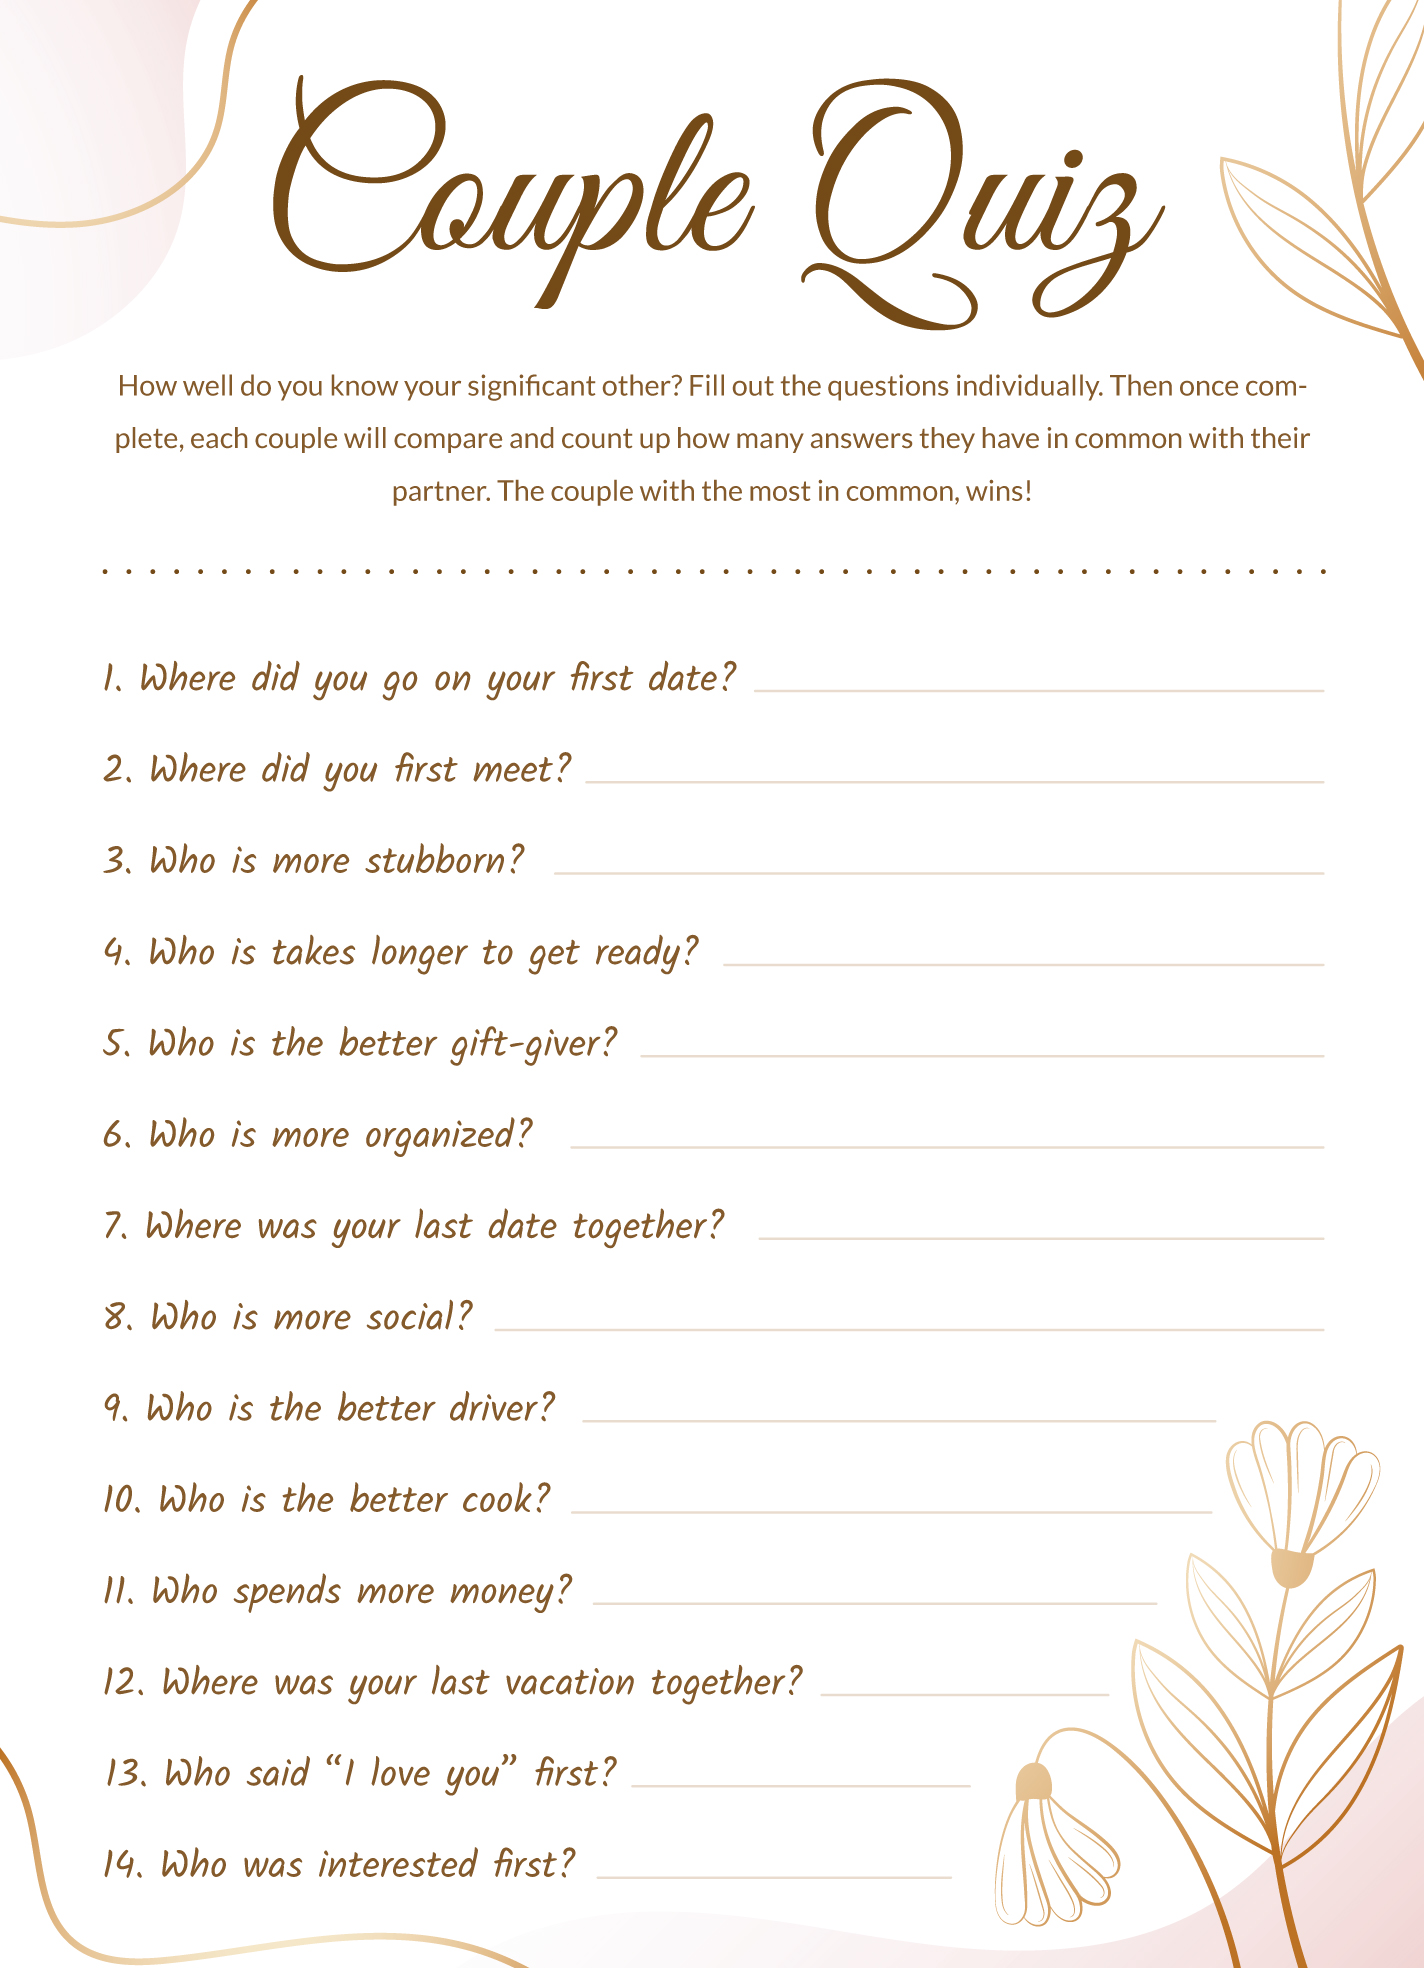 20 Questions for Couples